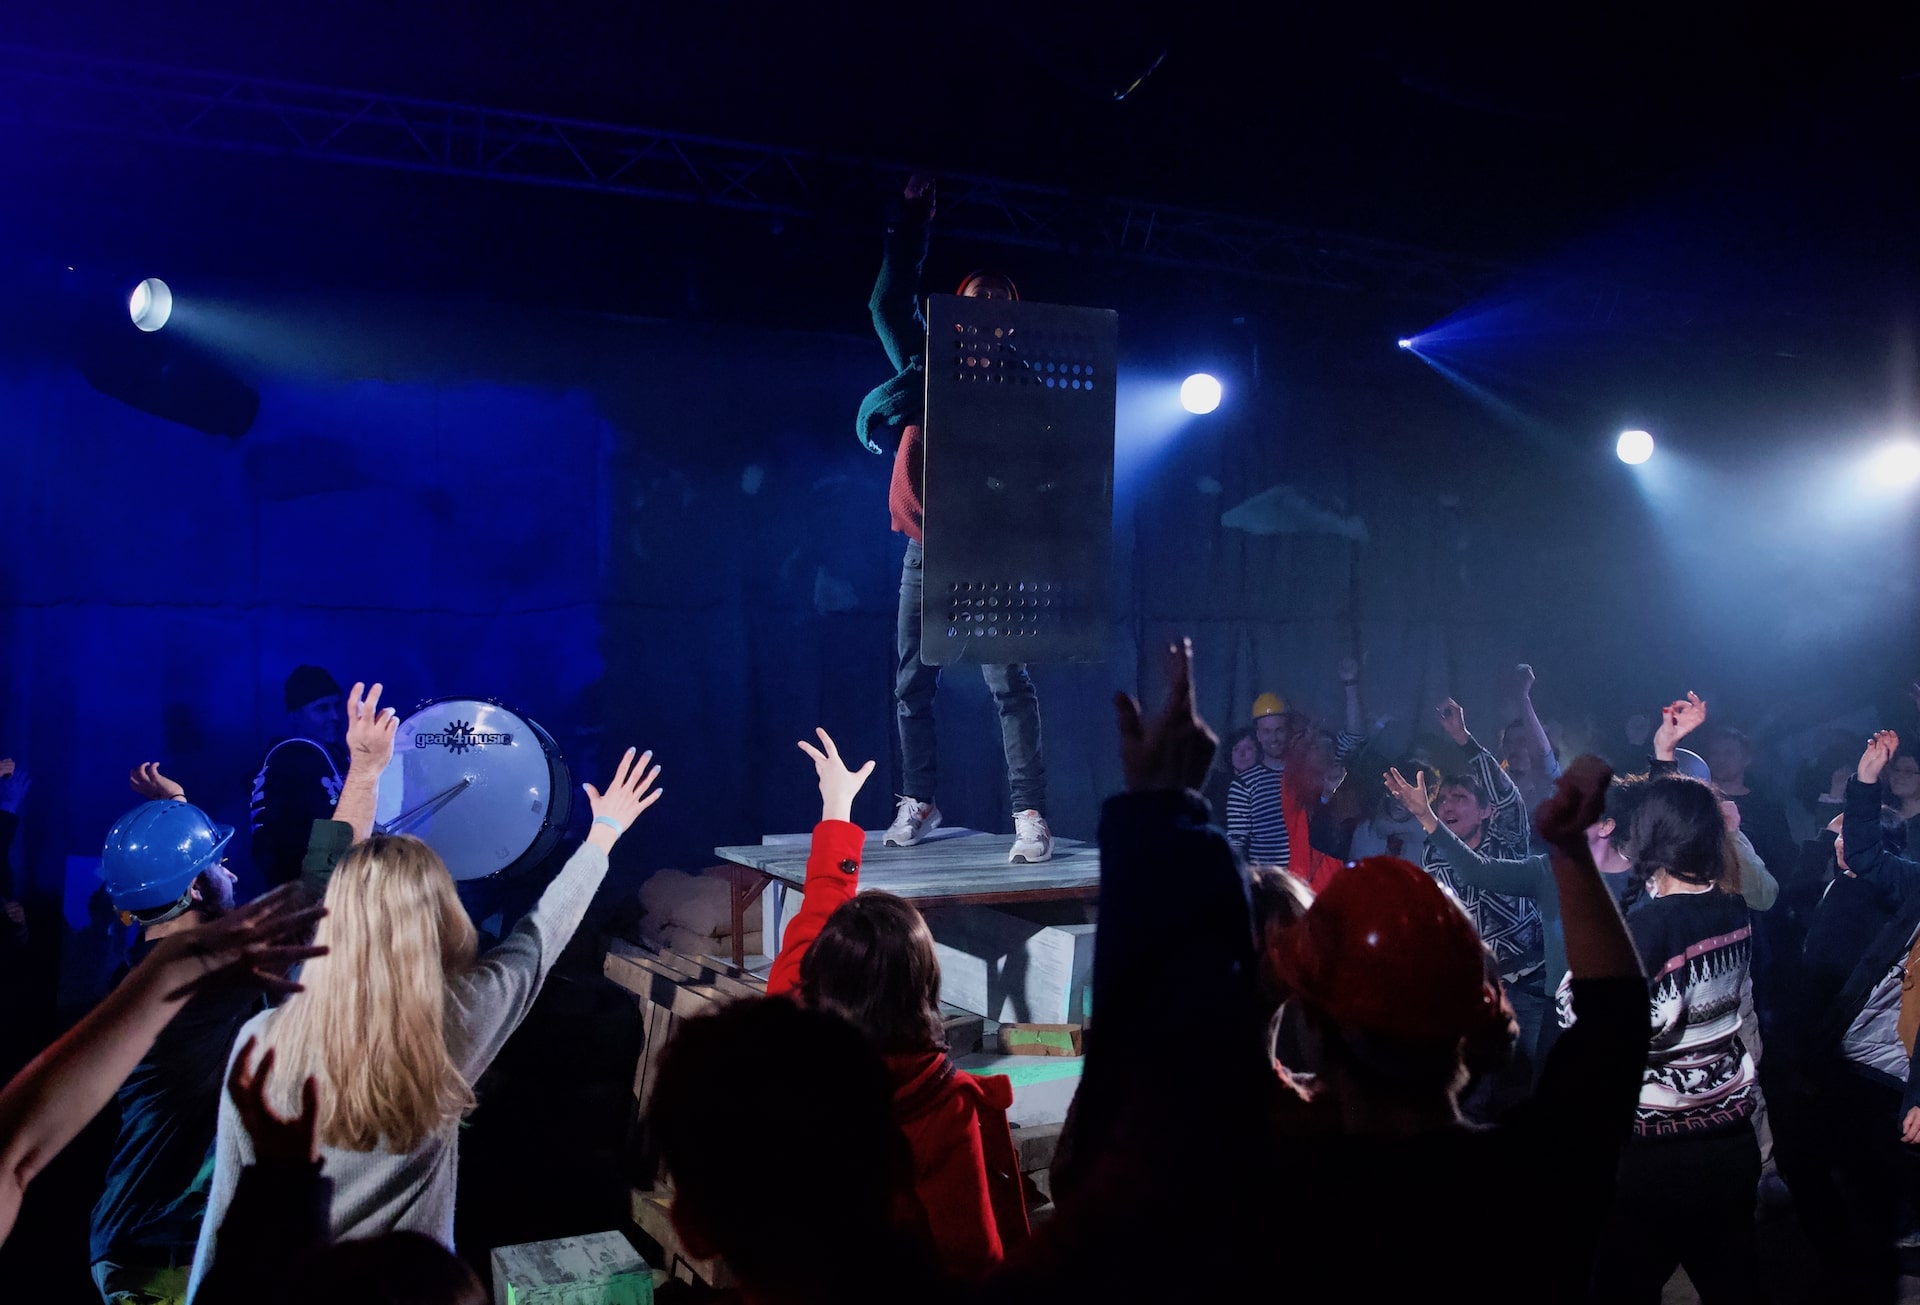 One performer standing in the middle holding a metal shield while the others stand around and holding their hands in the air